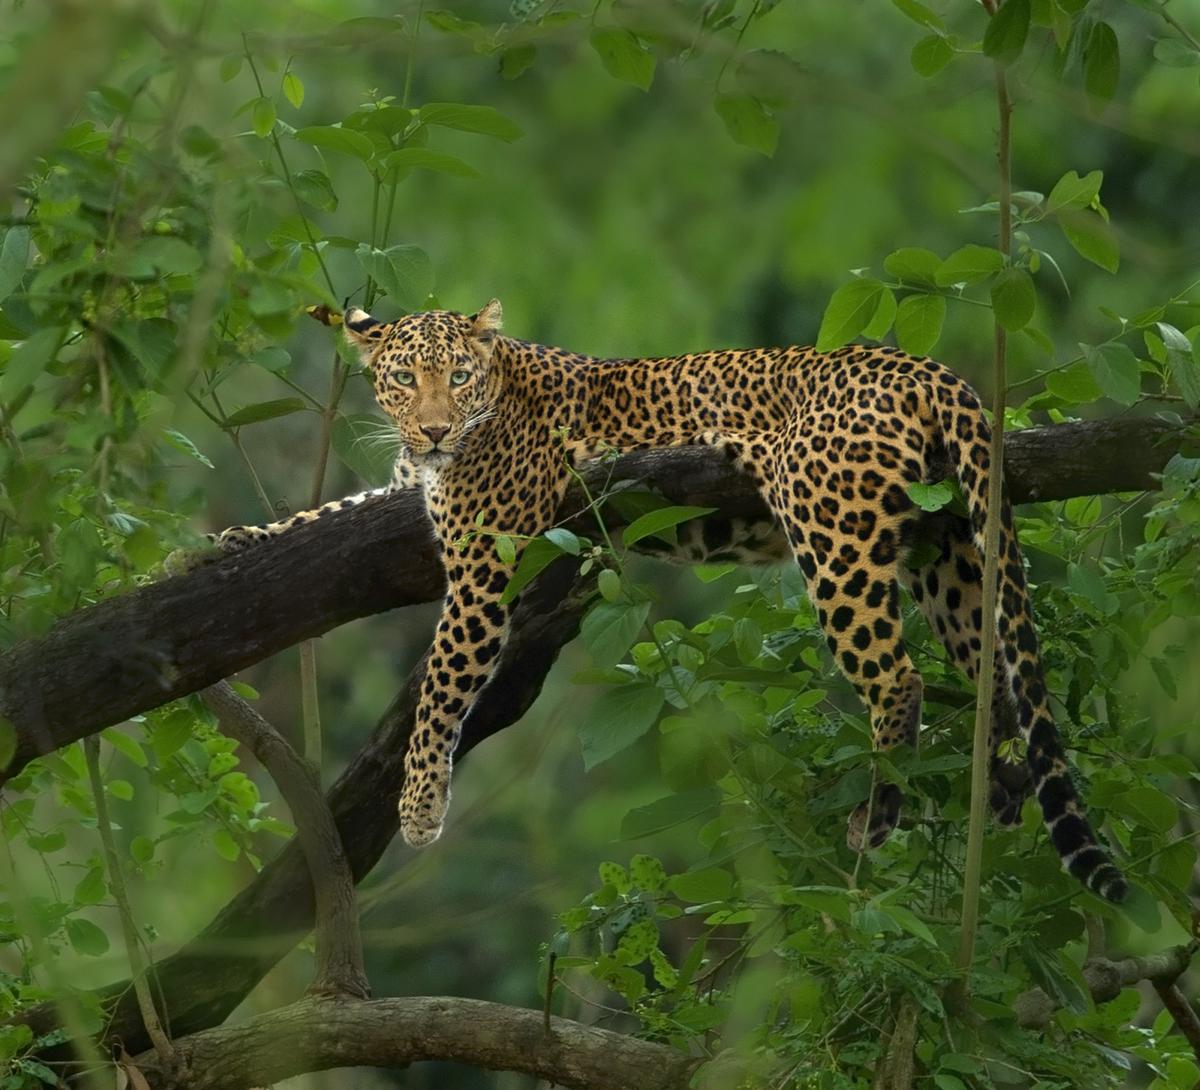 International Leopard Day is observed on 3rd May